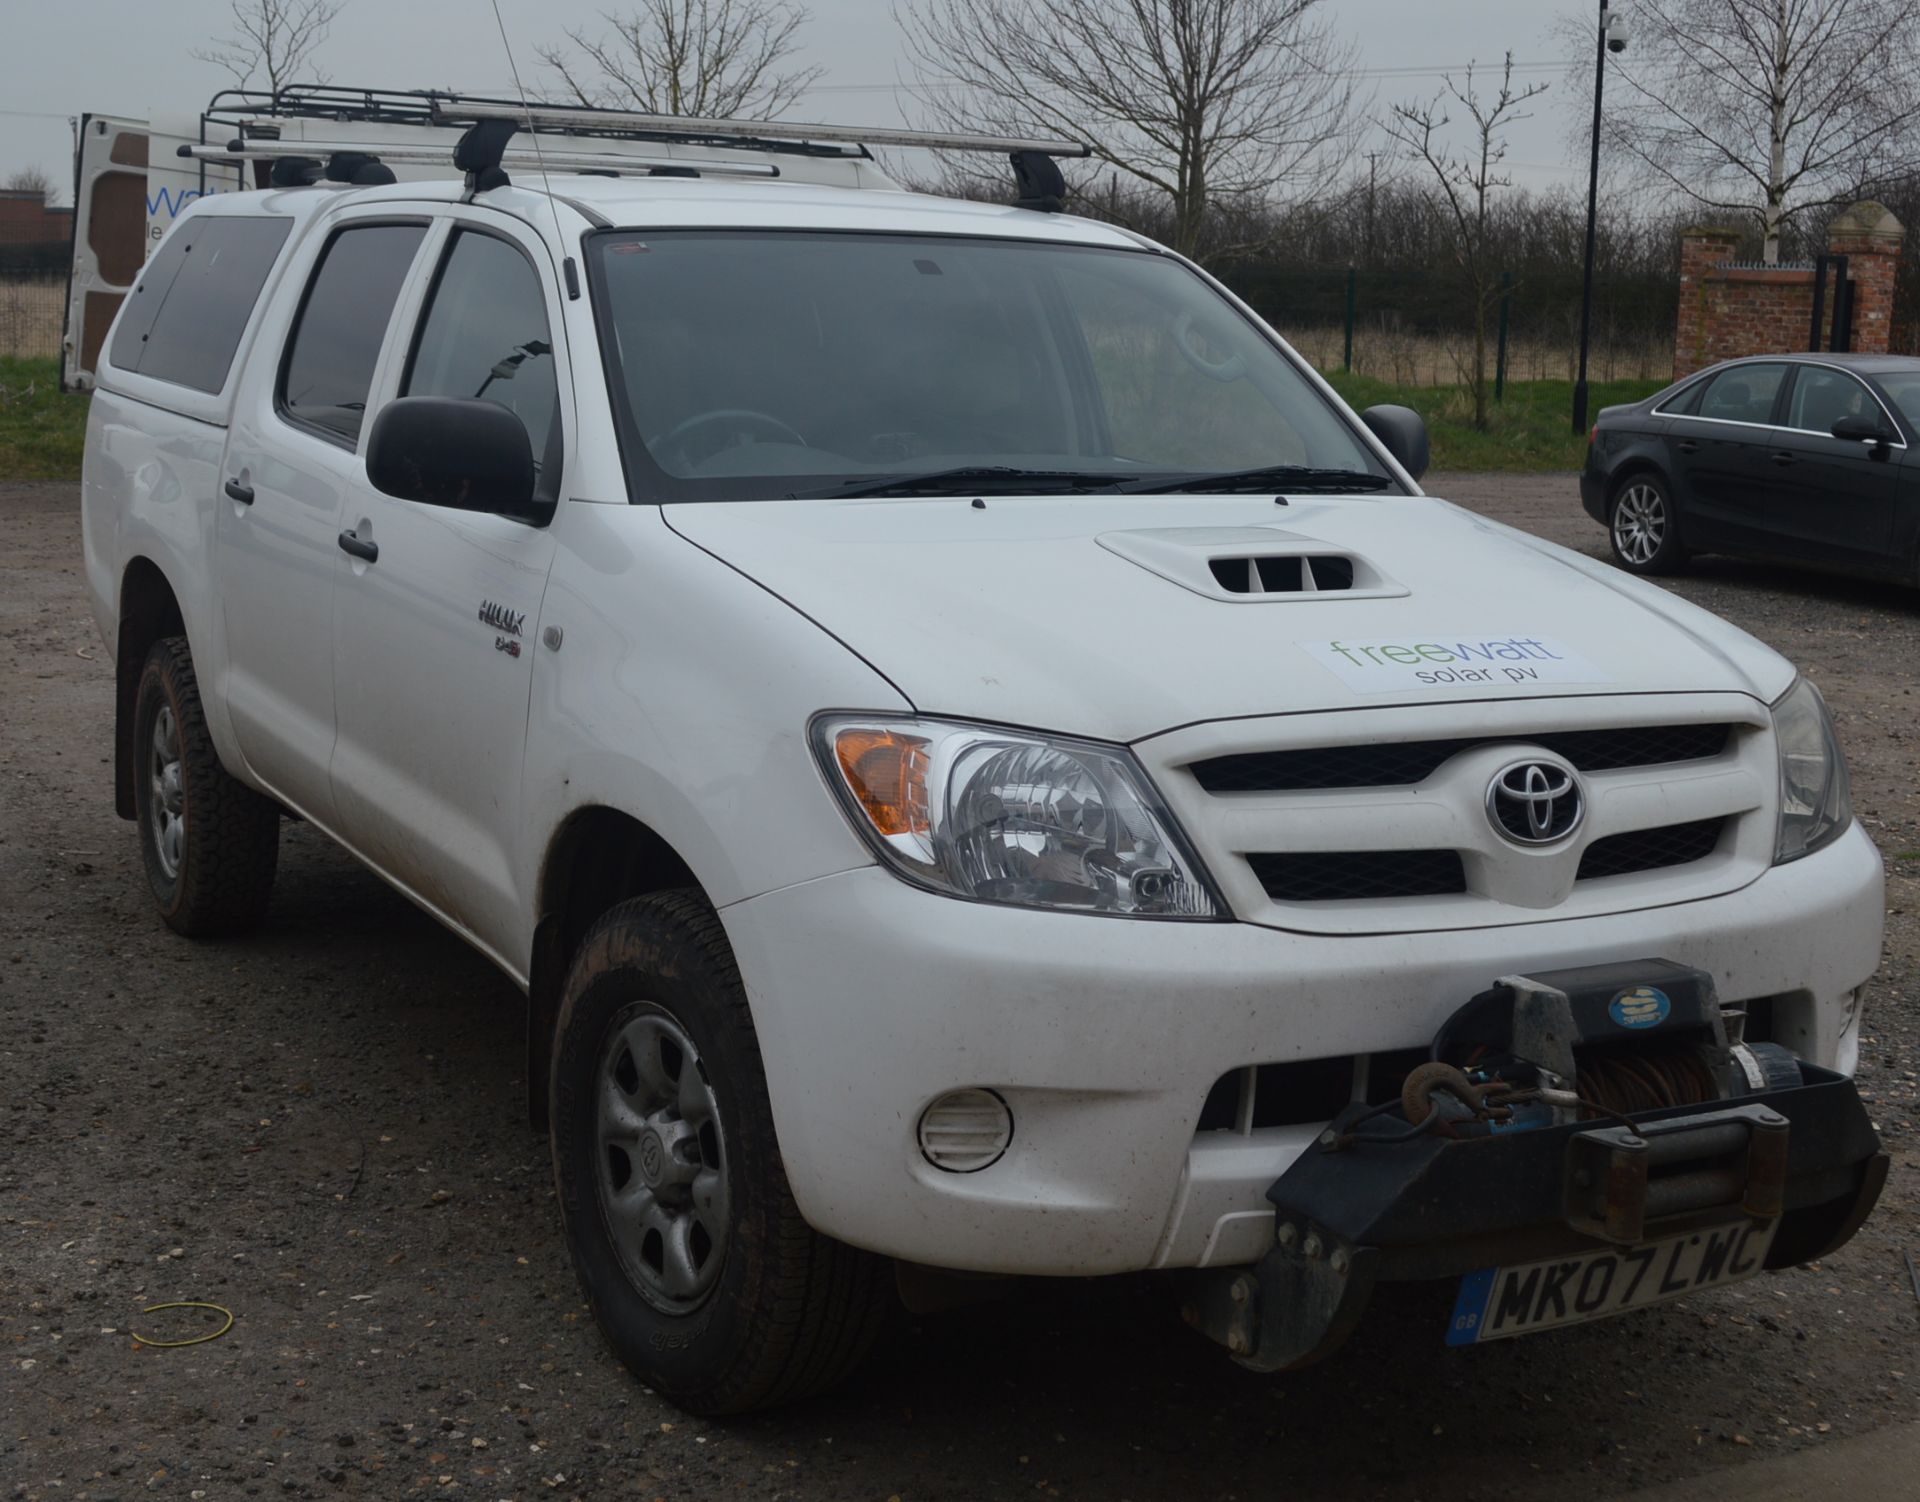 Toyota Hilux D-4D 4x4 Double Cab Pick Up Truck with Truck Top Cover Registration No: MK07 LWC